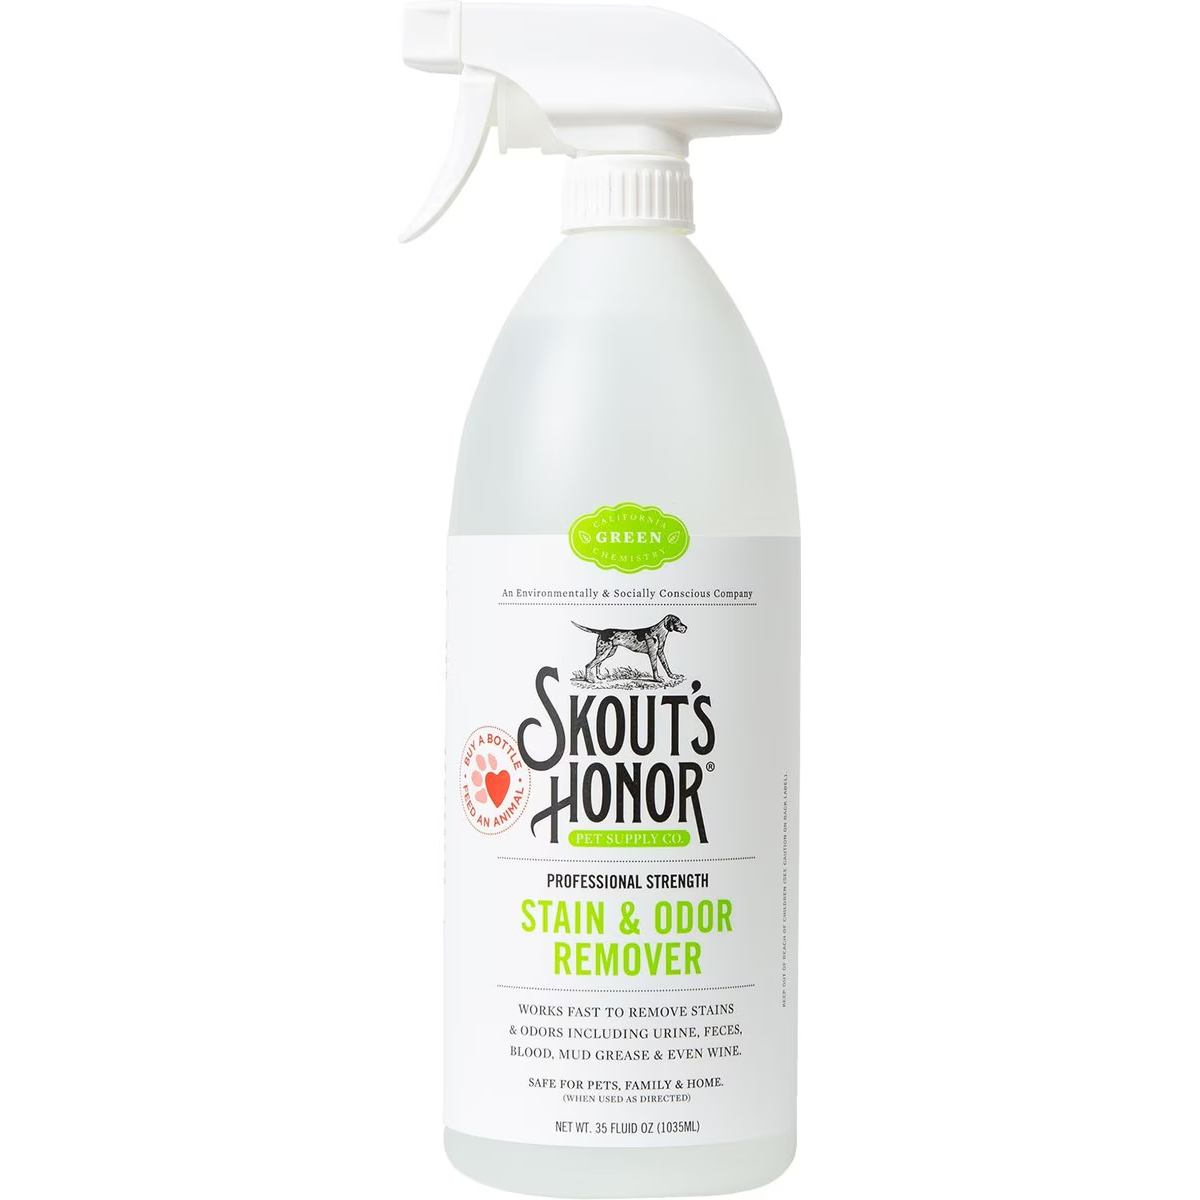 Skout's Honor Professional Strength Stain & Odor Remover